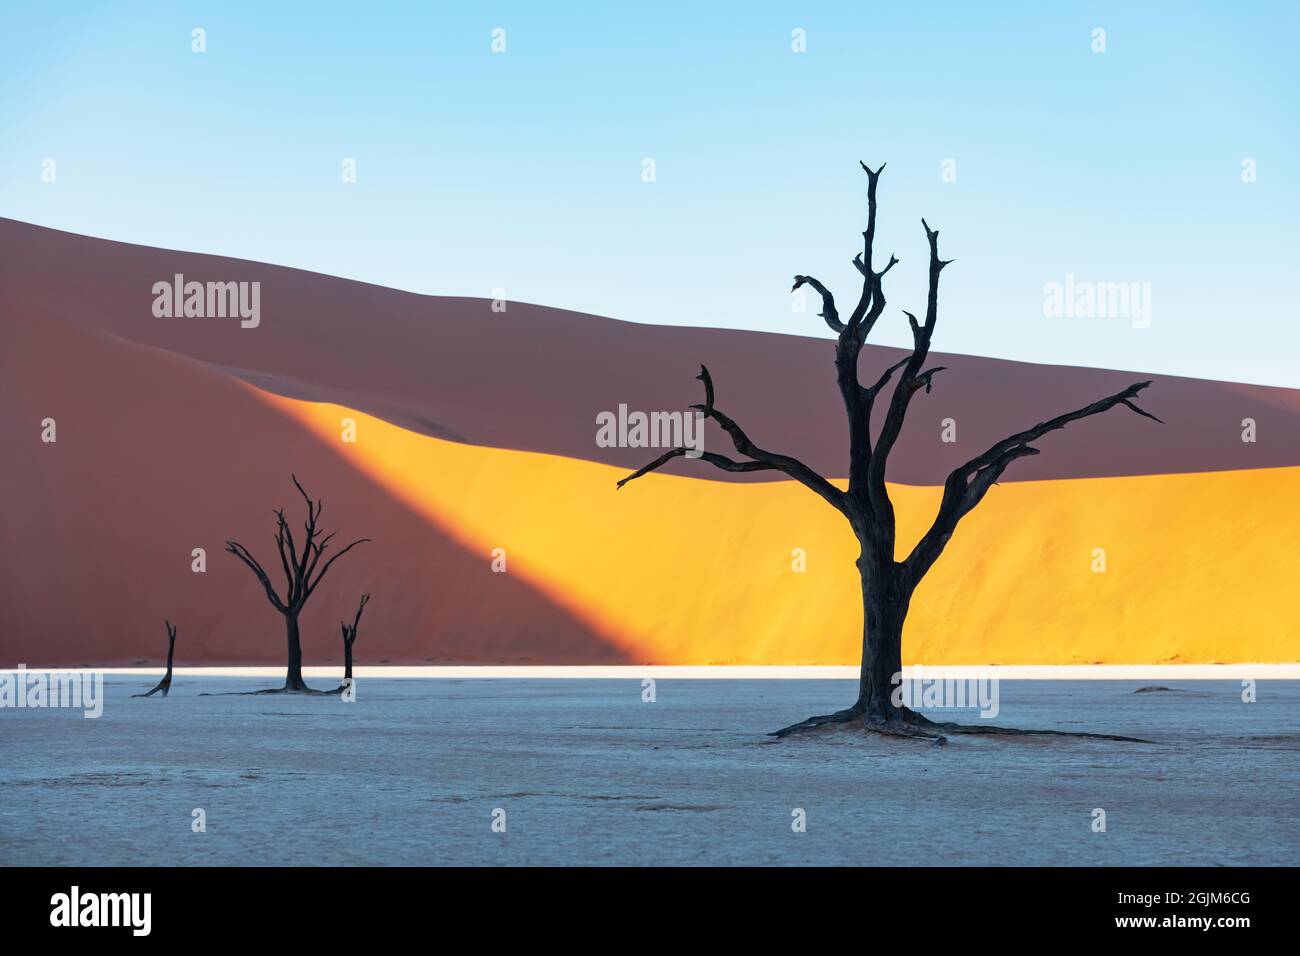 Dead Camelthorn Trees at sunrise, Deadvlei, Namib-Naukluft National Park, Namibia, Africa. Dried trees in Namib desert. Landscape photography Stock Photo